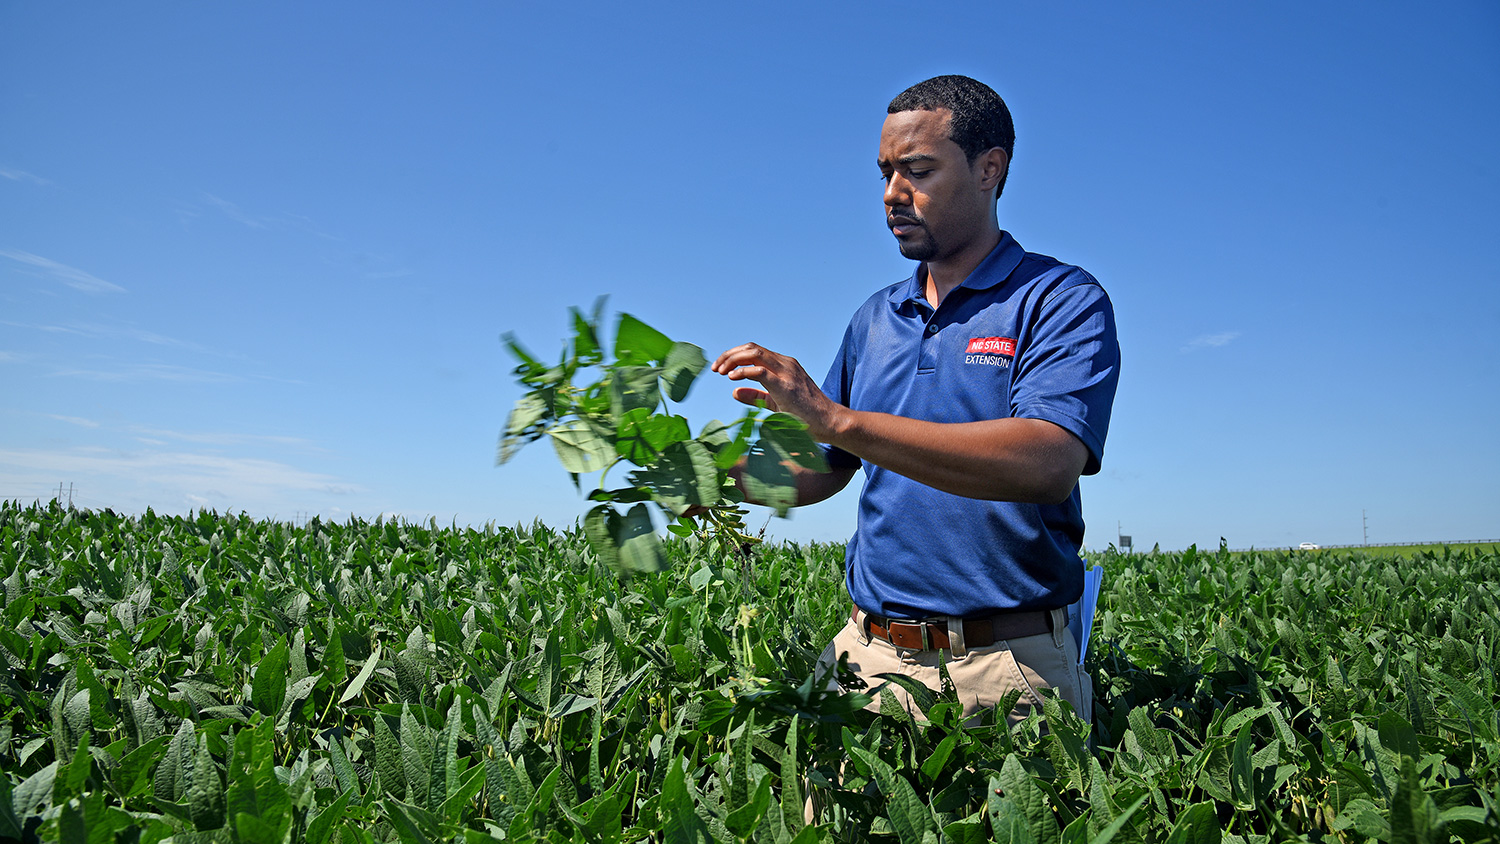 Extension agent inspects soybeans